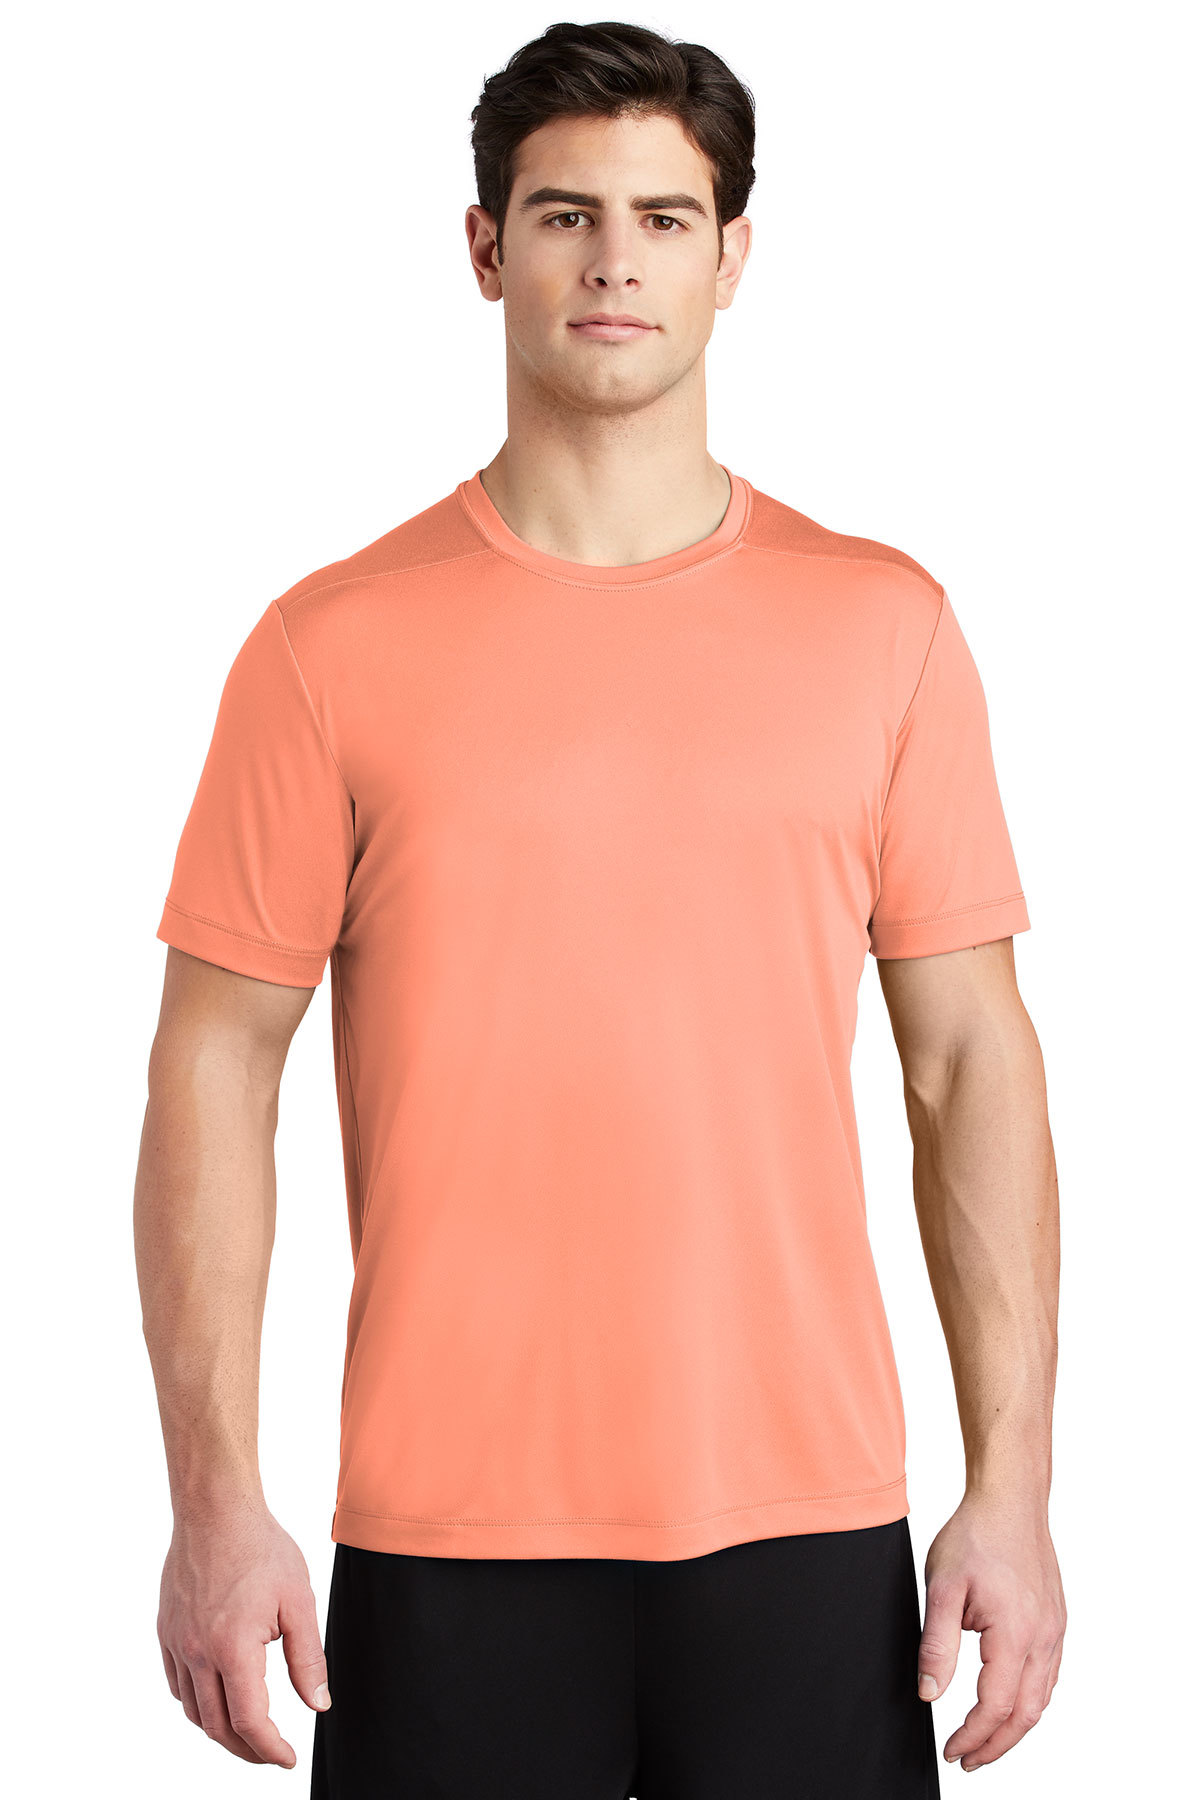 click to view Soft Coral